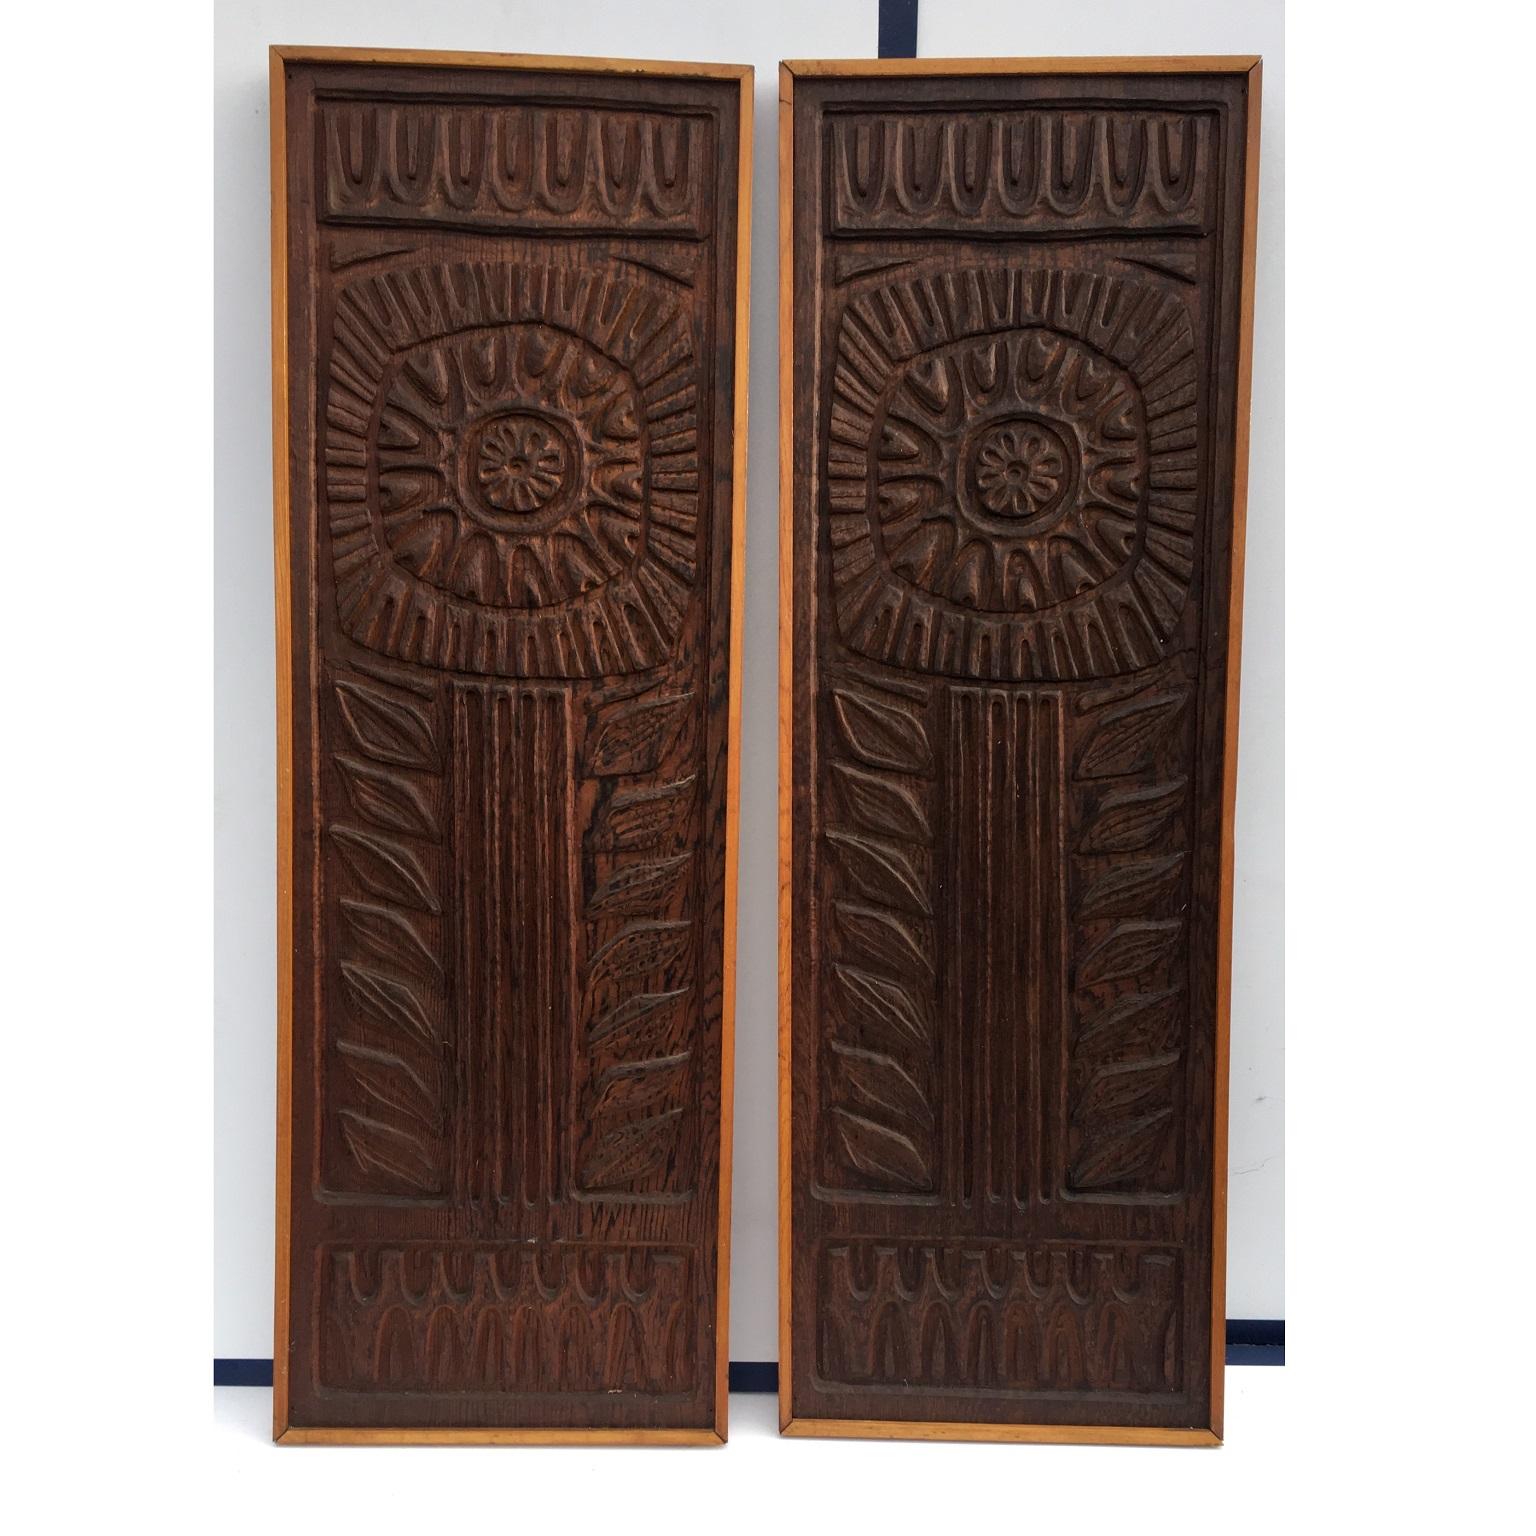 MCM Pair of Evelyn Ackerman Wood Carved Panels for Panelcarve, Joy’s Flower 3